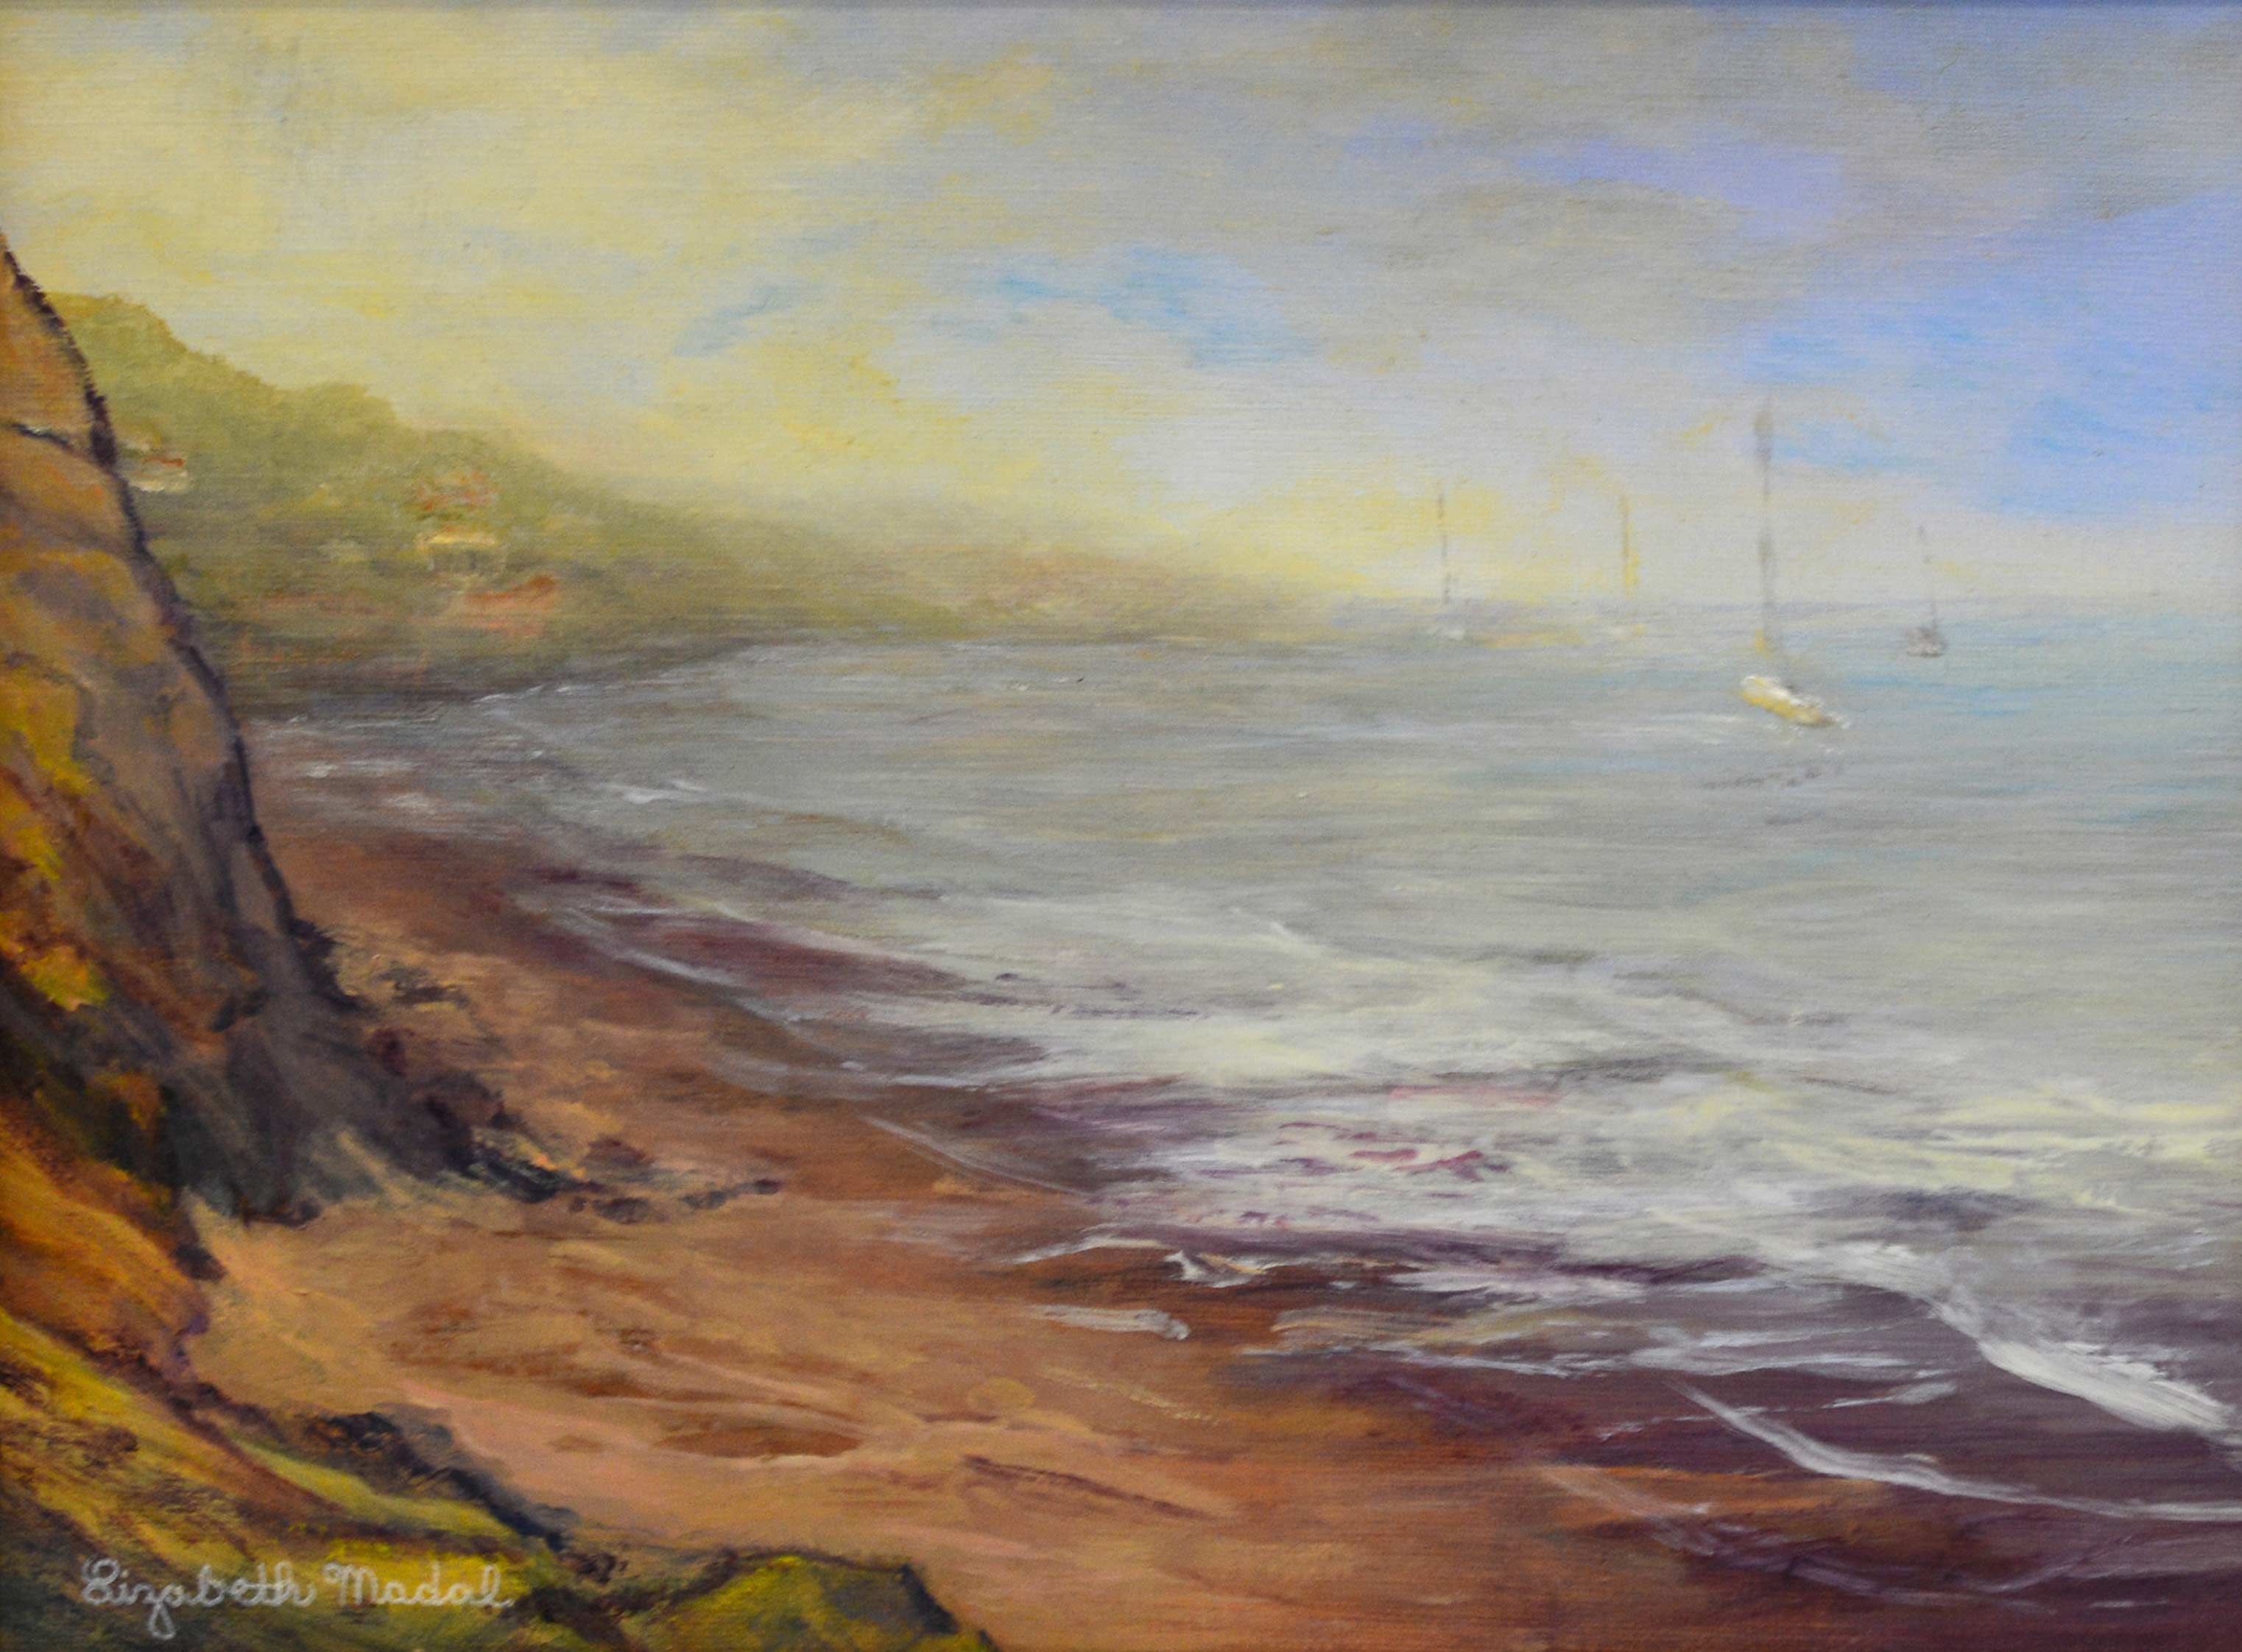 An oil painting of sandy shoreline with sailboats.